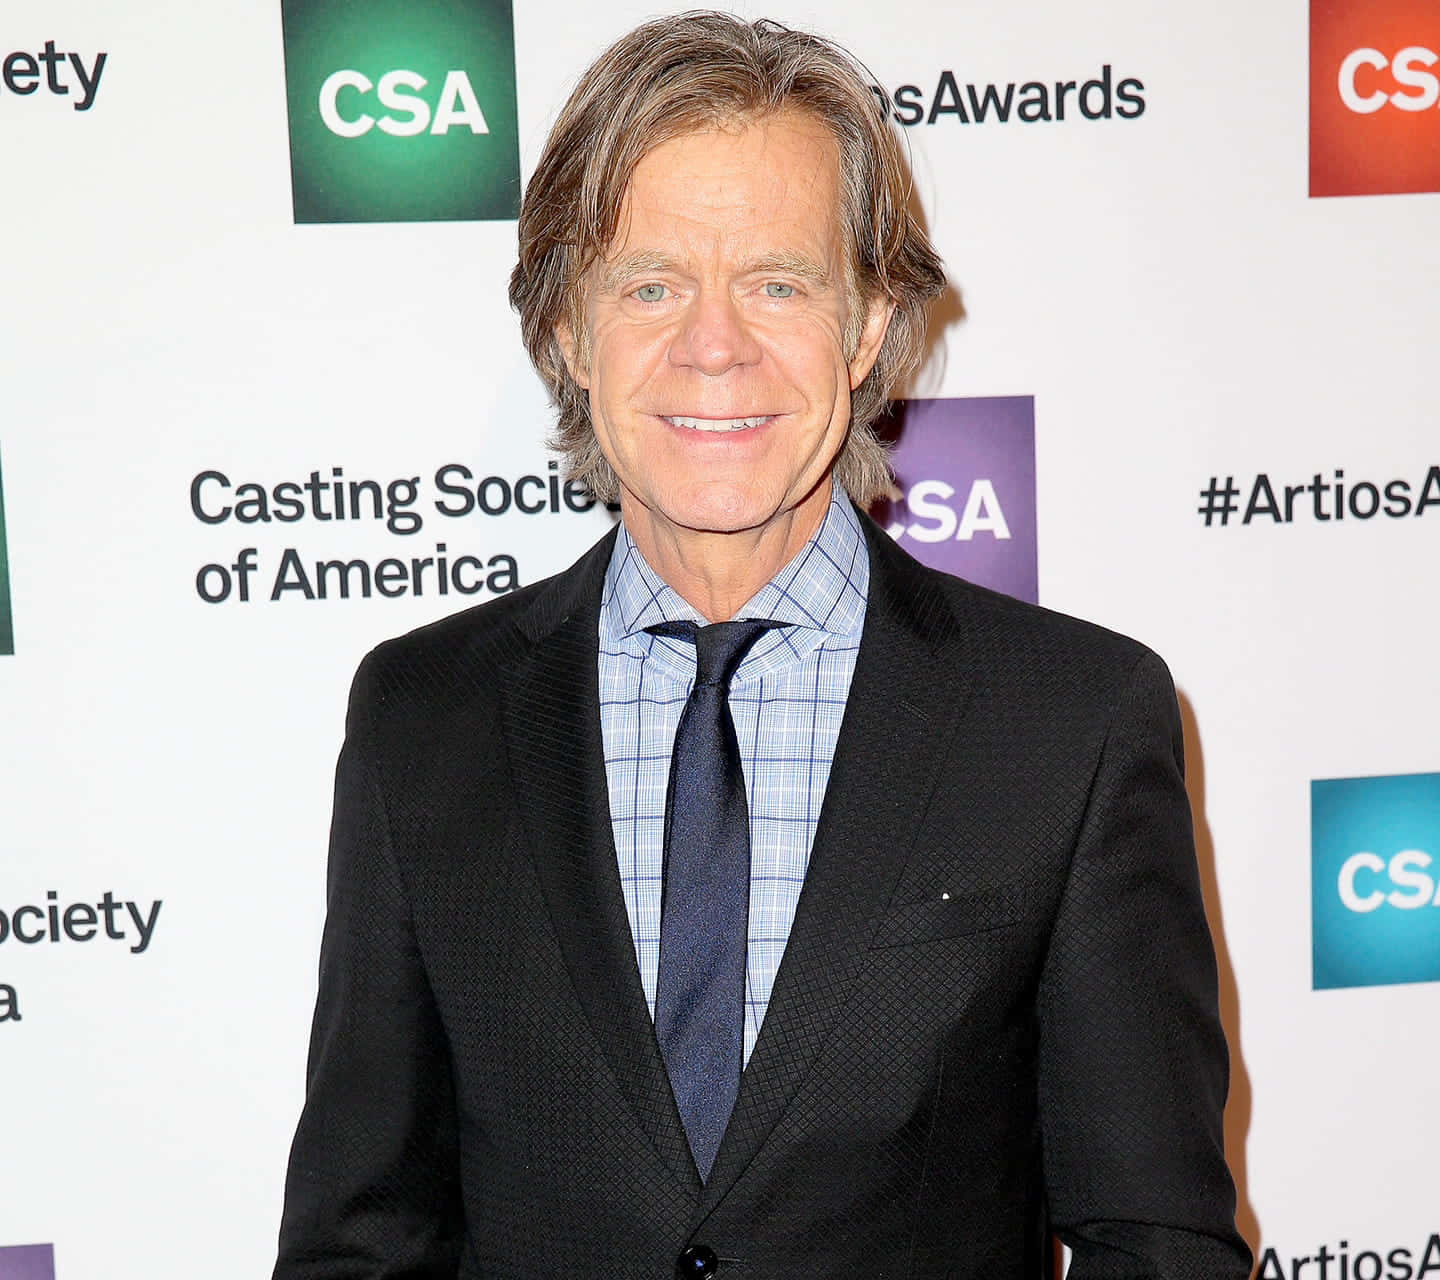 A Portrait Of William H. Macy, The Talented American Actor And Director Background